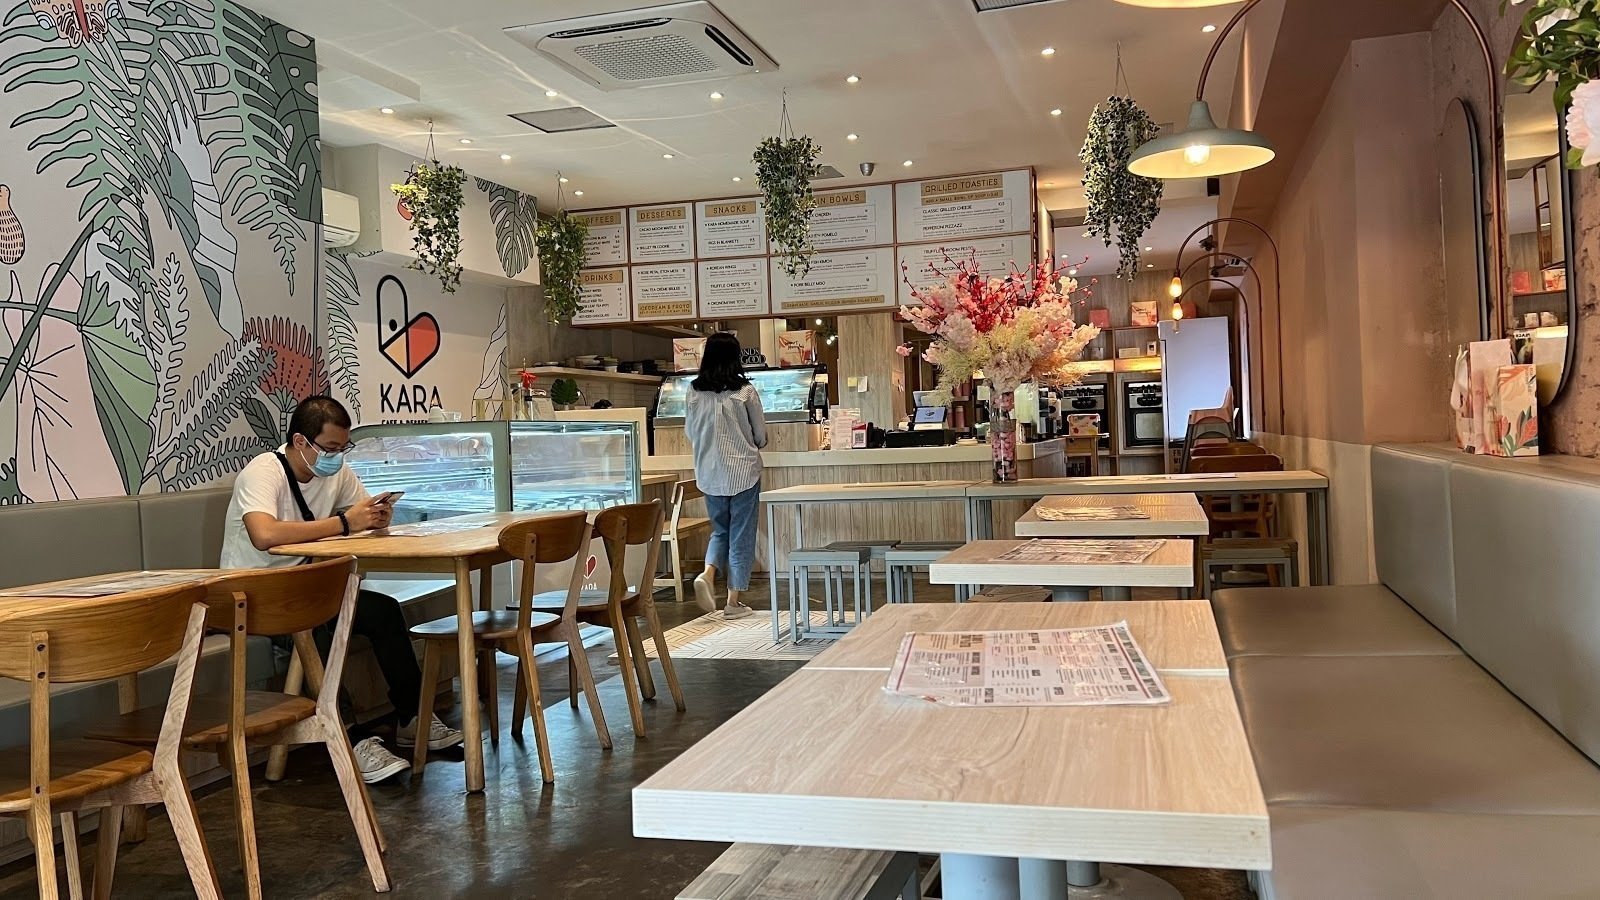 <span class="translation_missing" title="translation missing: en.meta.location_title, location_name: KARA Cafe and Dessert Bar, city: Singapore">Location Title</span>